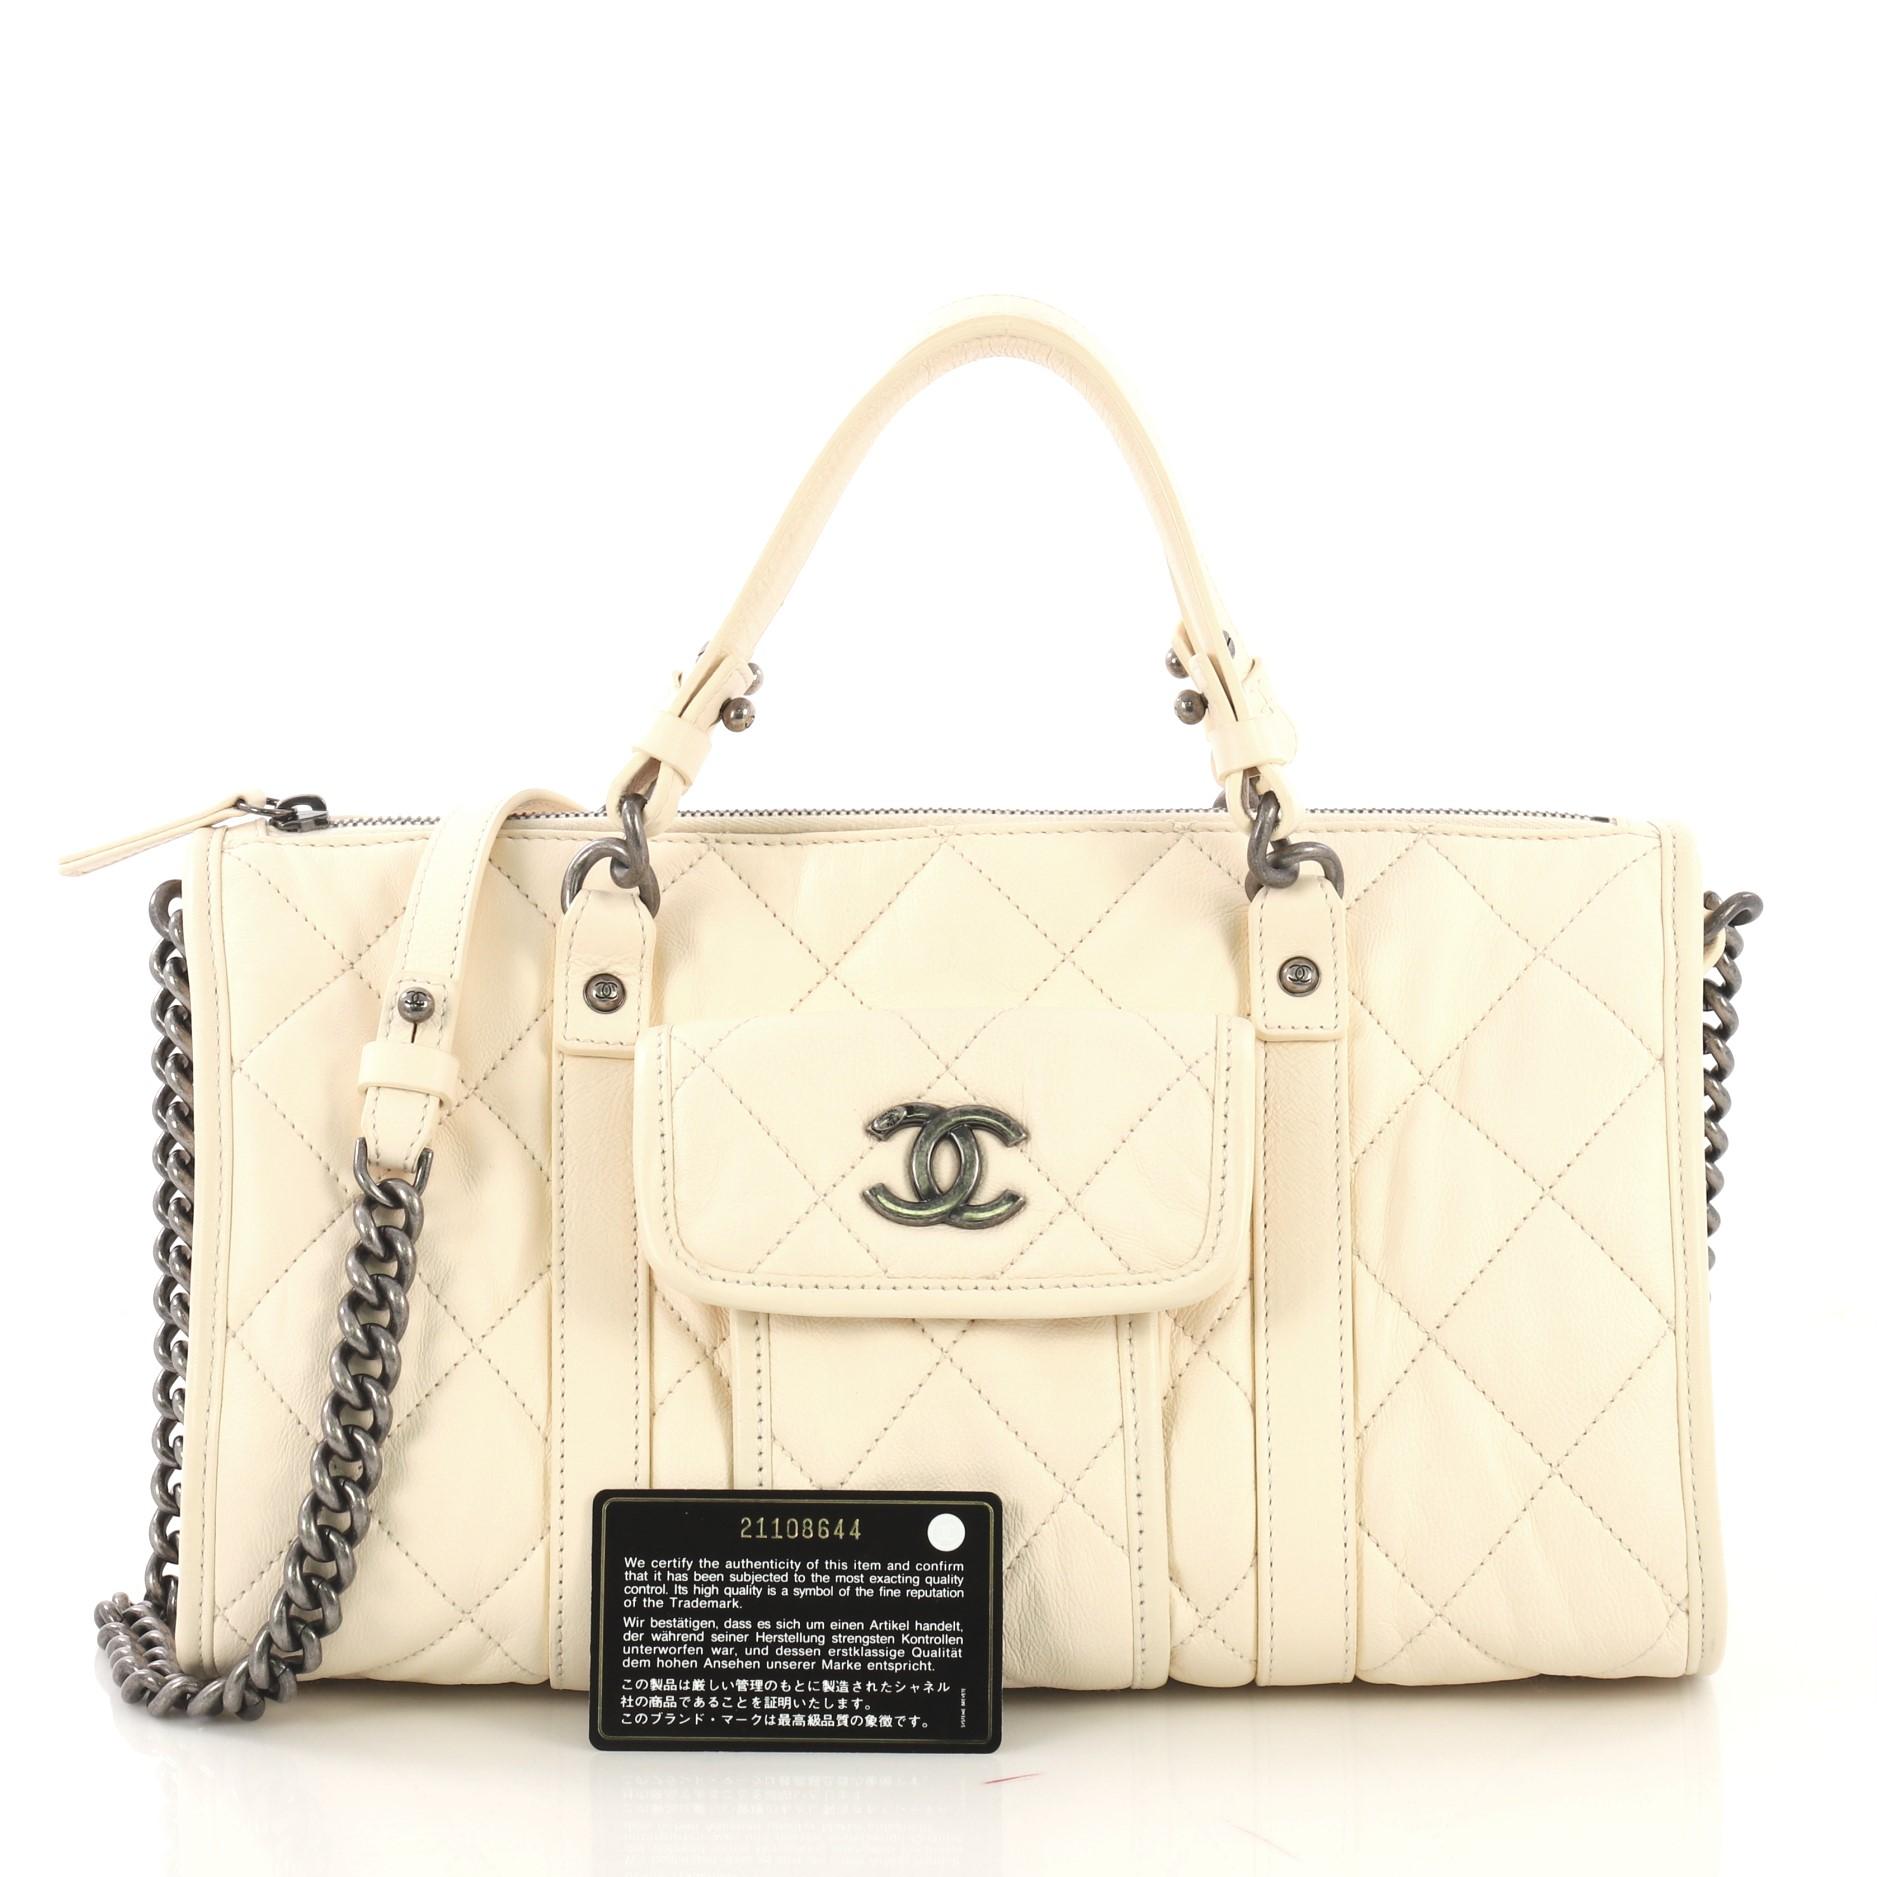 This Chanel Casual Riviera Bowling Bag Quilted Calfskin Medium, crafted from white quilted calfskin leather, features dual top leather handles, chain link strap with leather pad, exterior front pocket with CC logo, protective base studs and aged